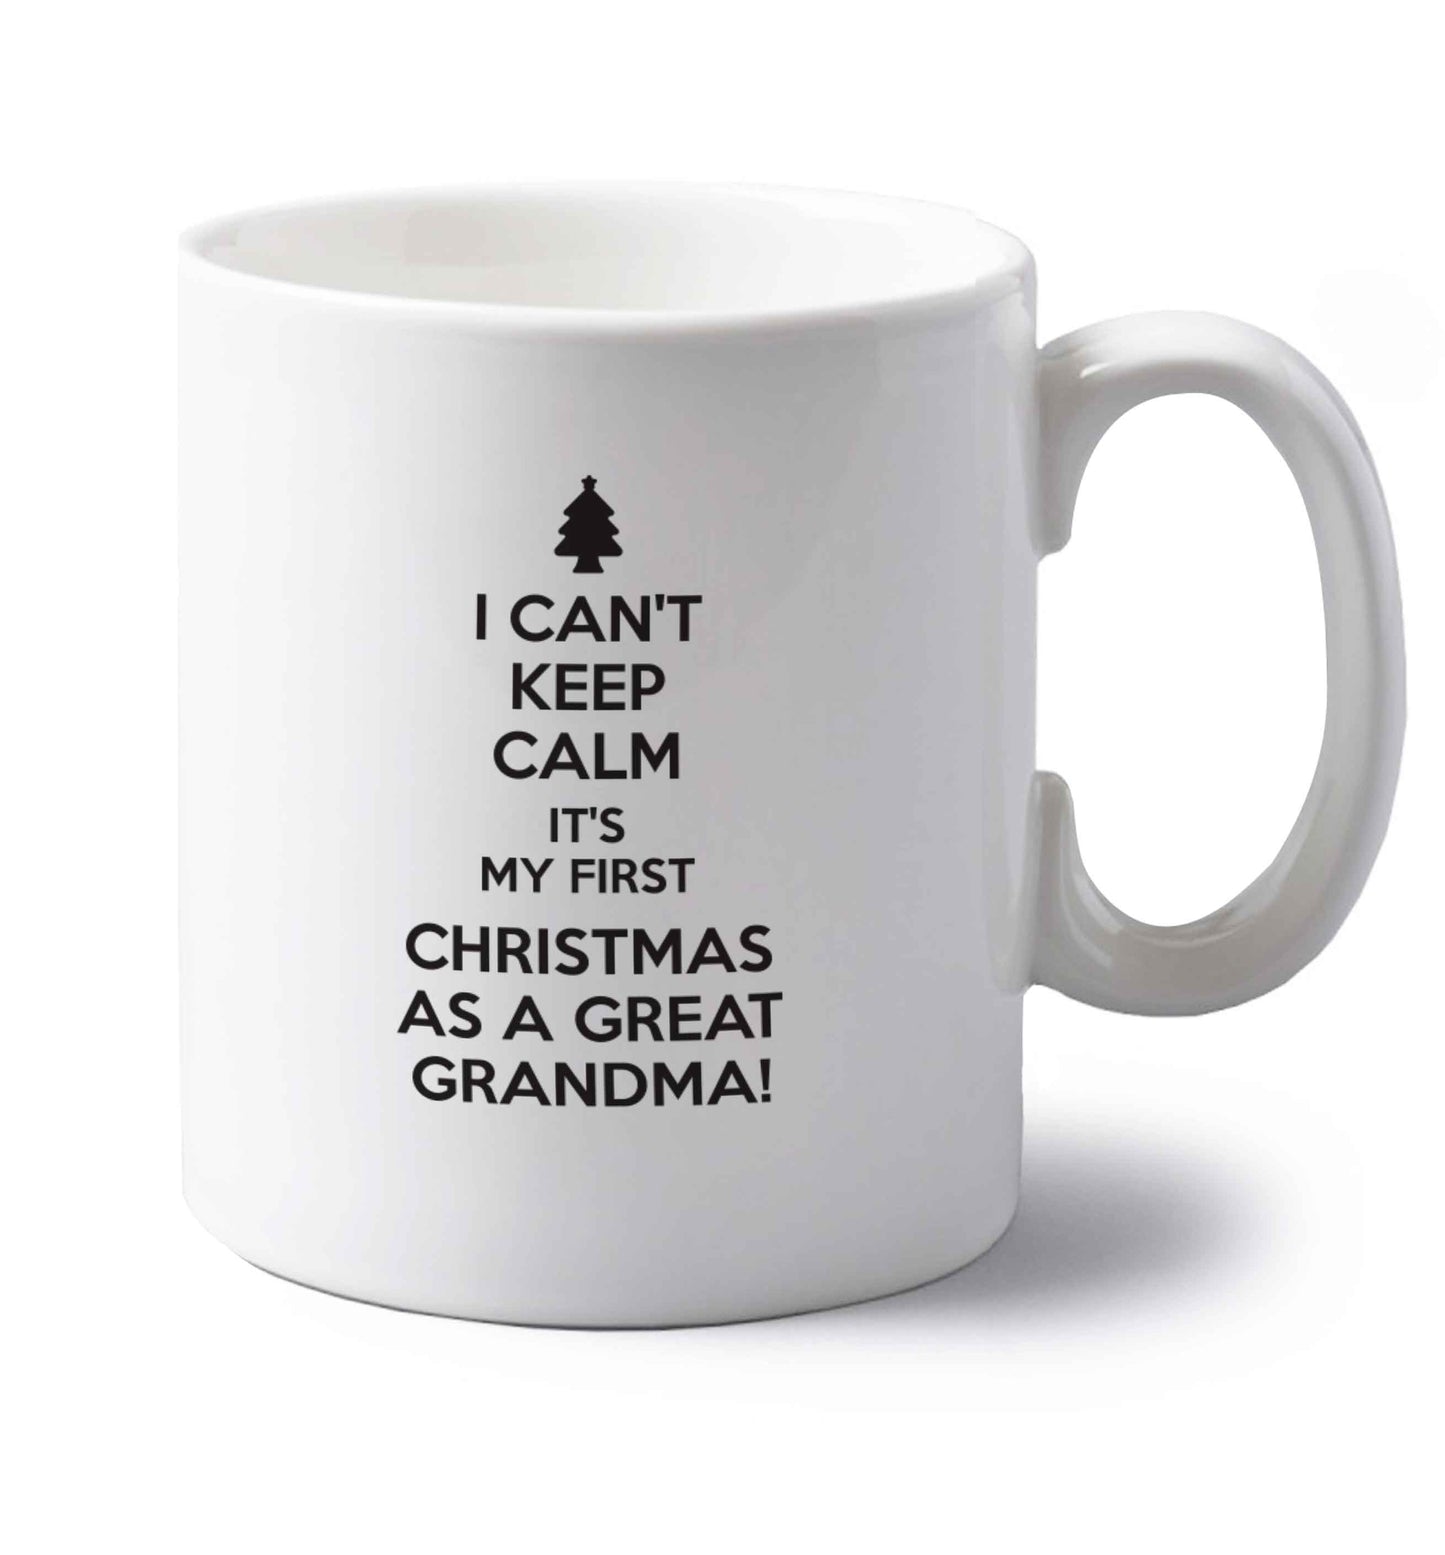 I can't keep calm it's my first Christmas as a great grandma! left handed white ceramic mug 